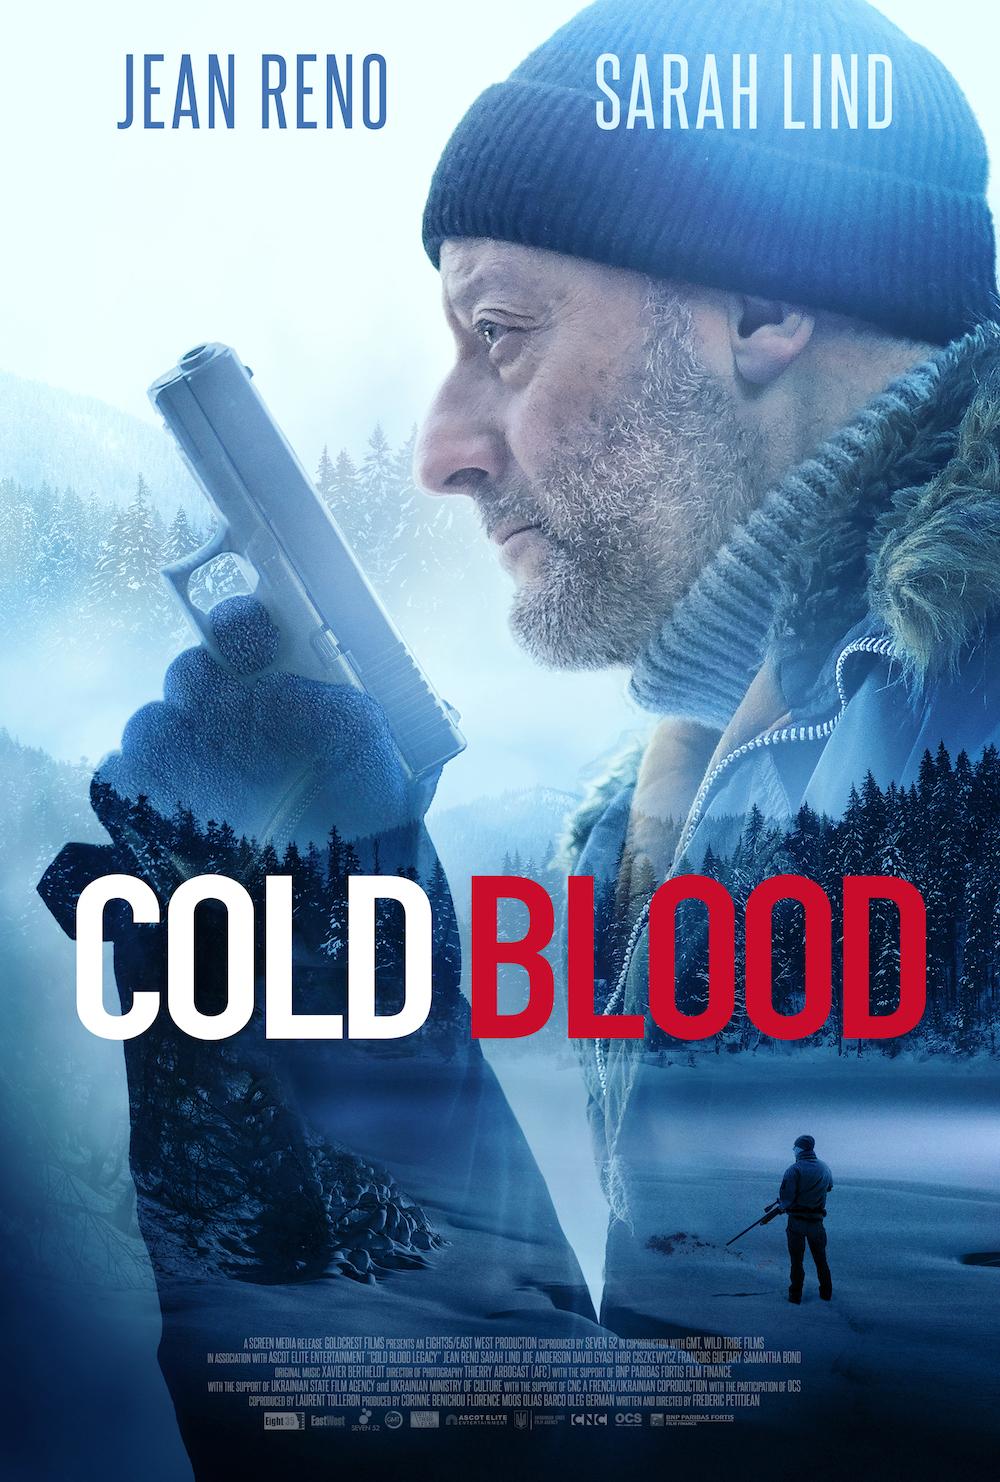 A poster with Jean Reno, who plays Henry, a retired hit man, in "Cold Blood," originally titled "Cold Blood Legacy." (Goldcrest Films International)